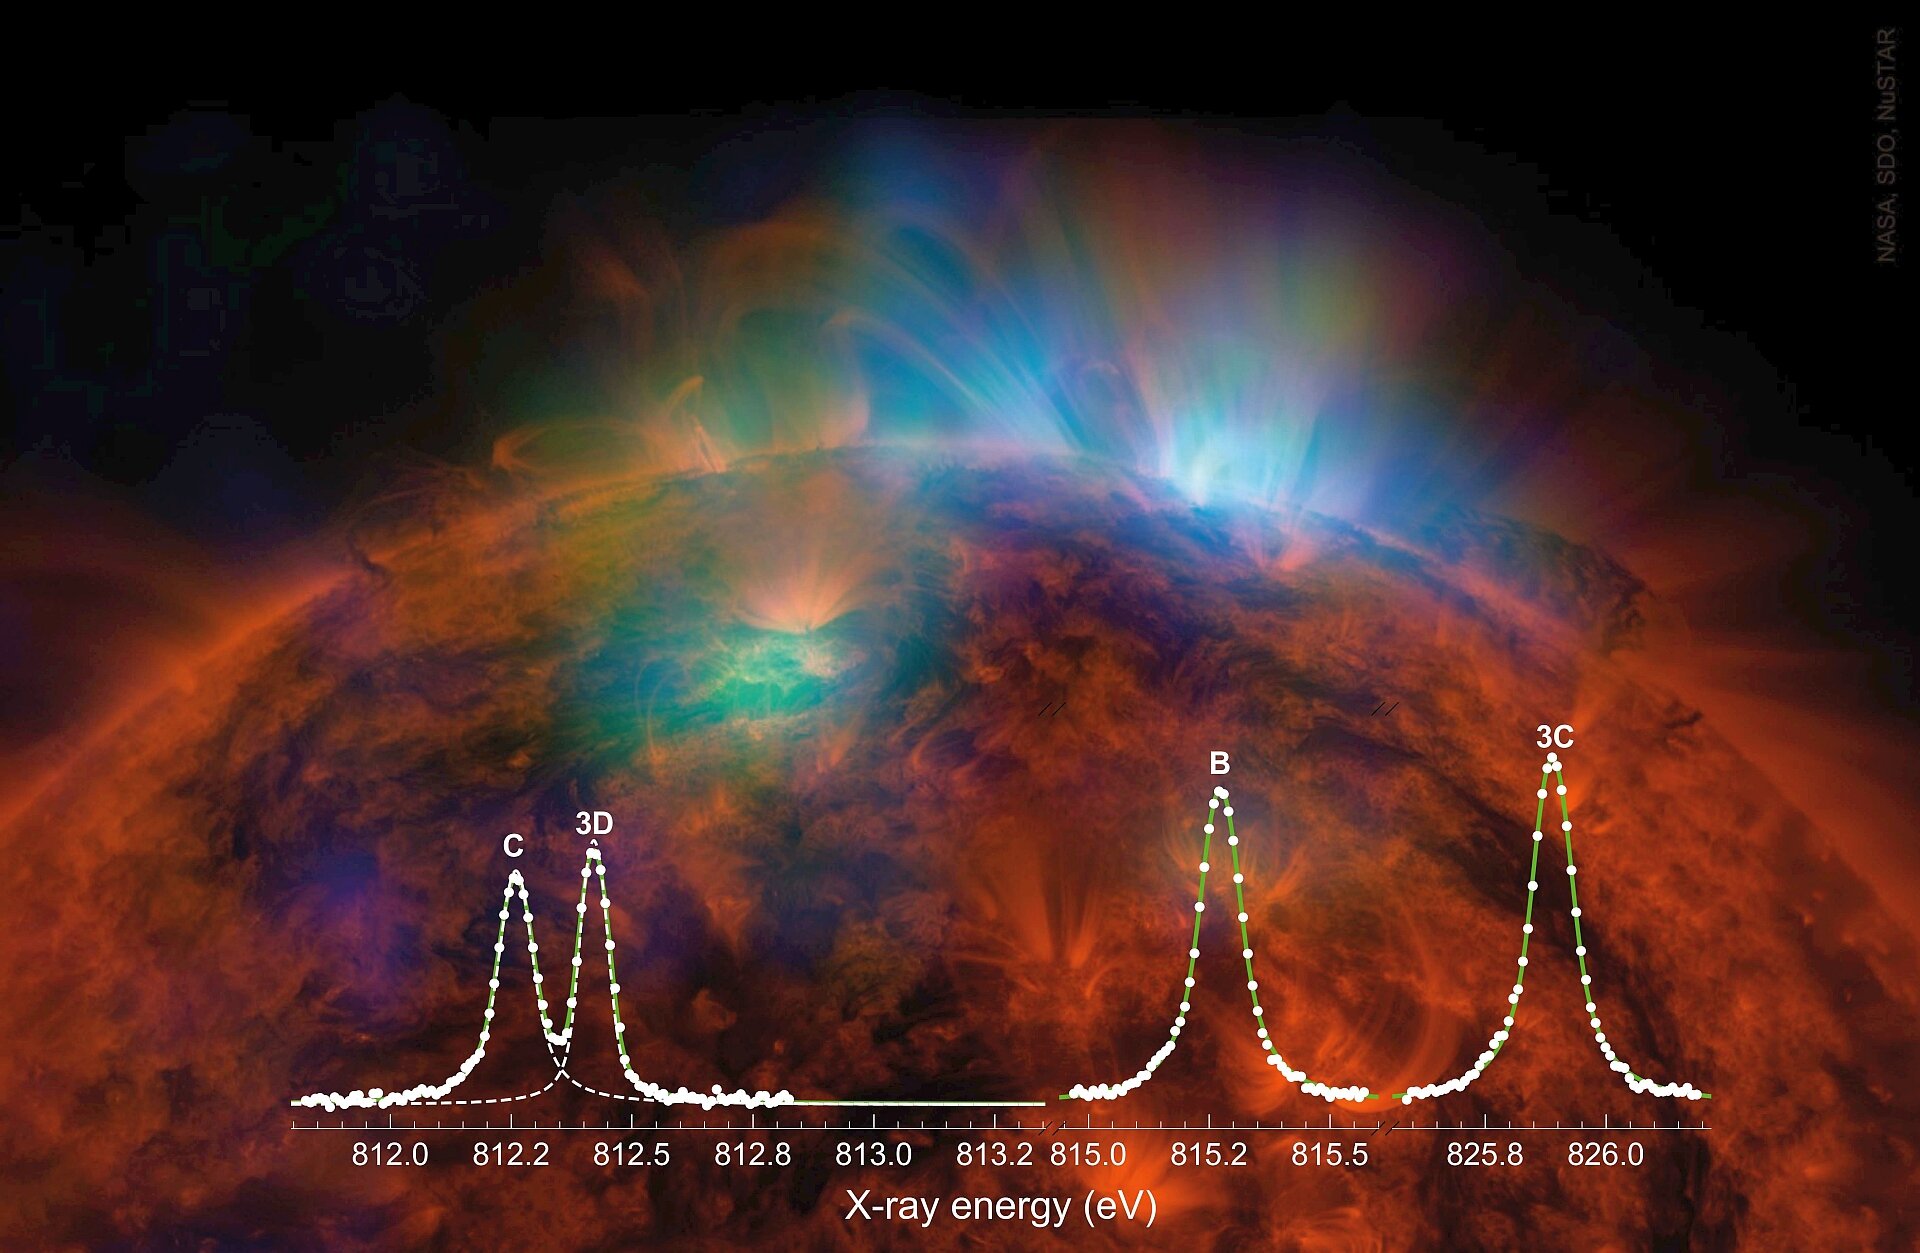 X-ray analysis without doubt: Four-decade enigma of cosmic X-rays solved